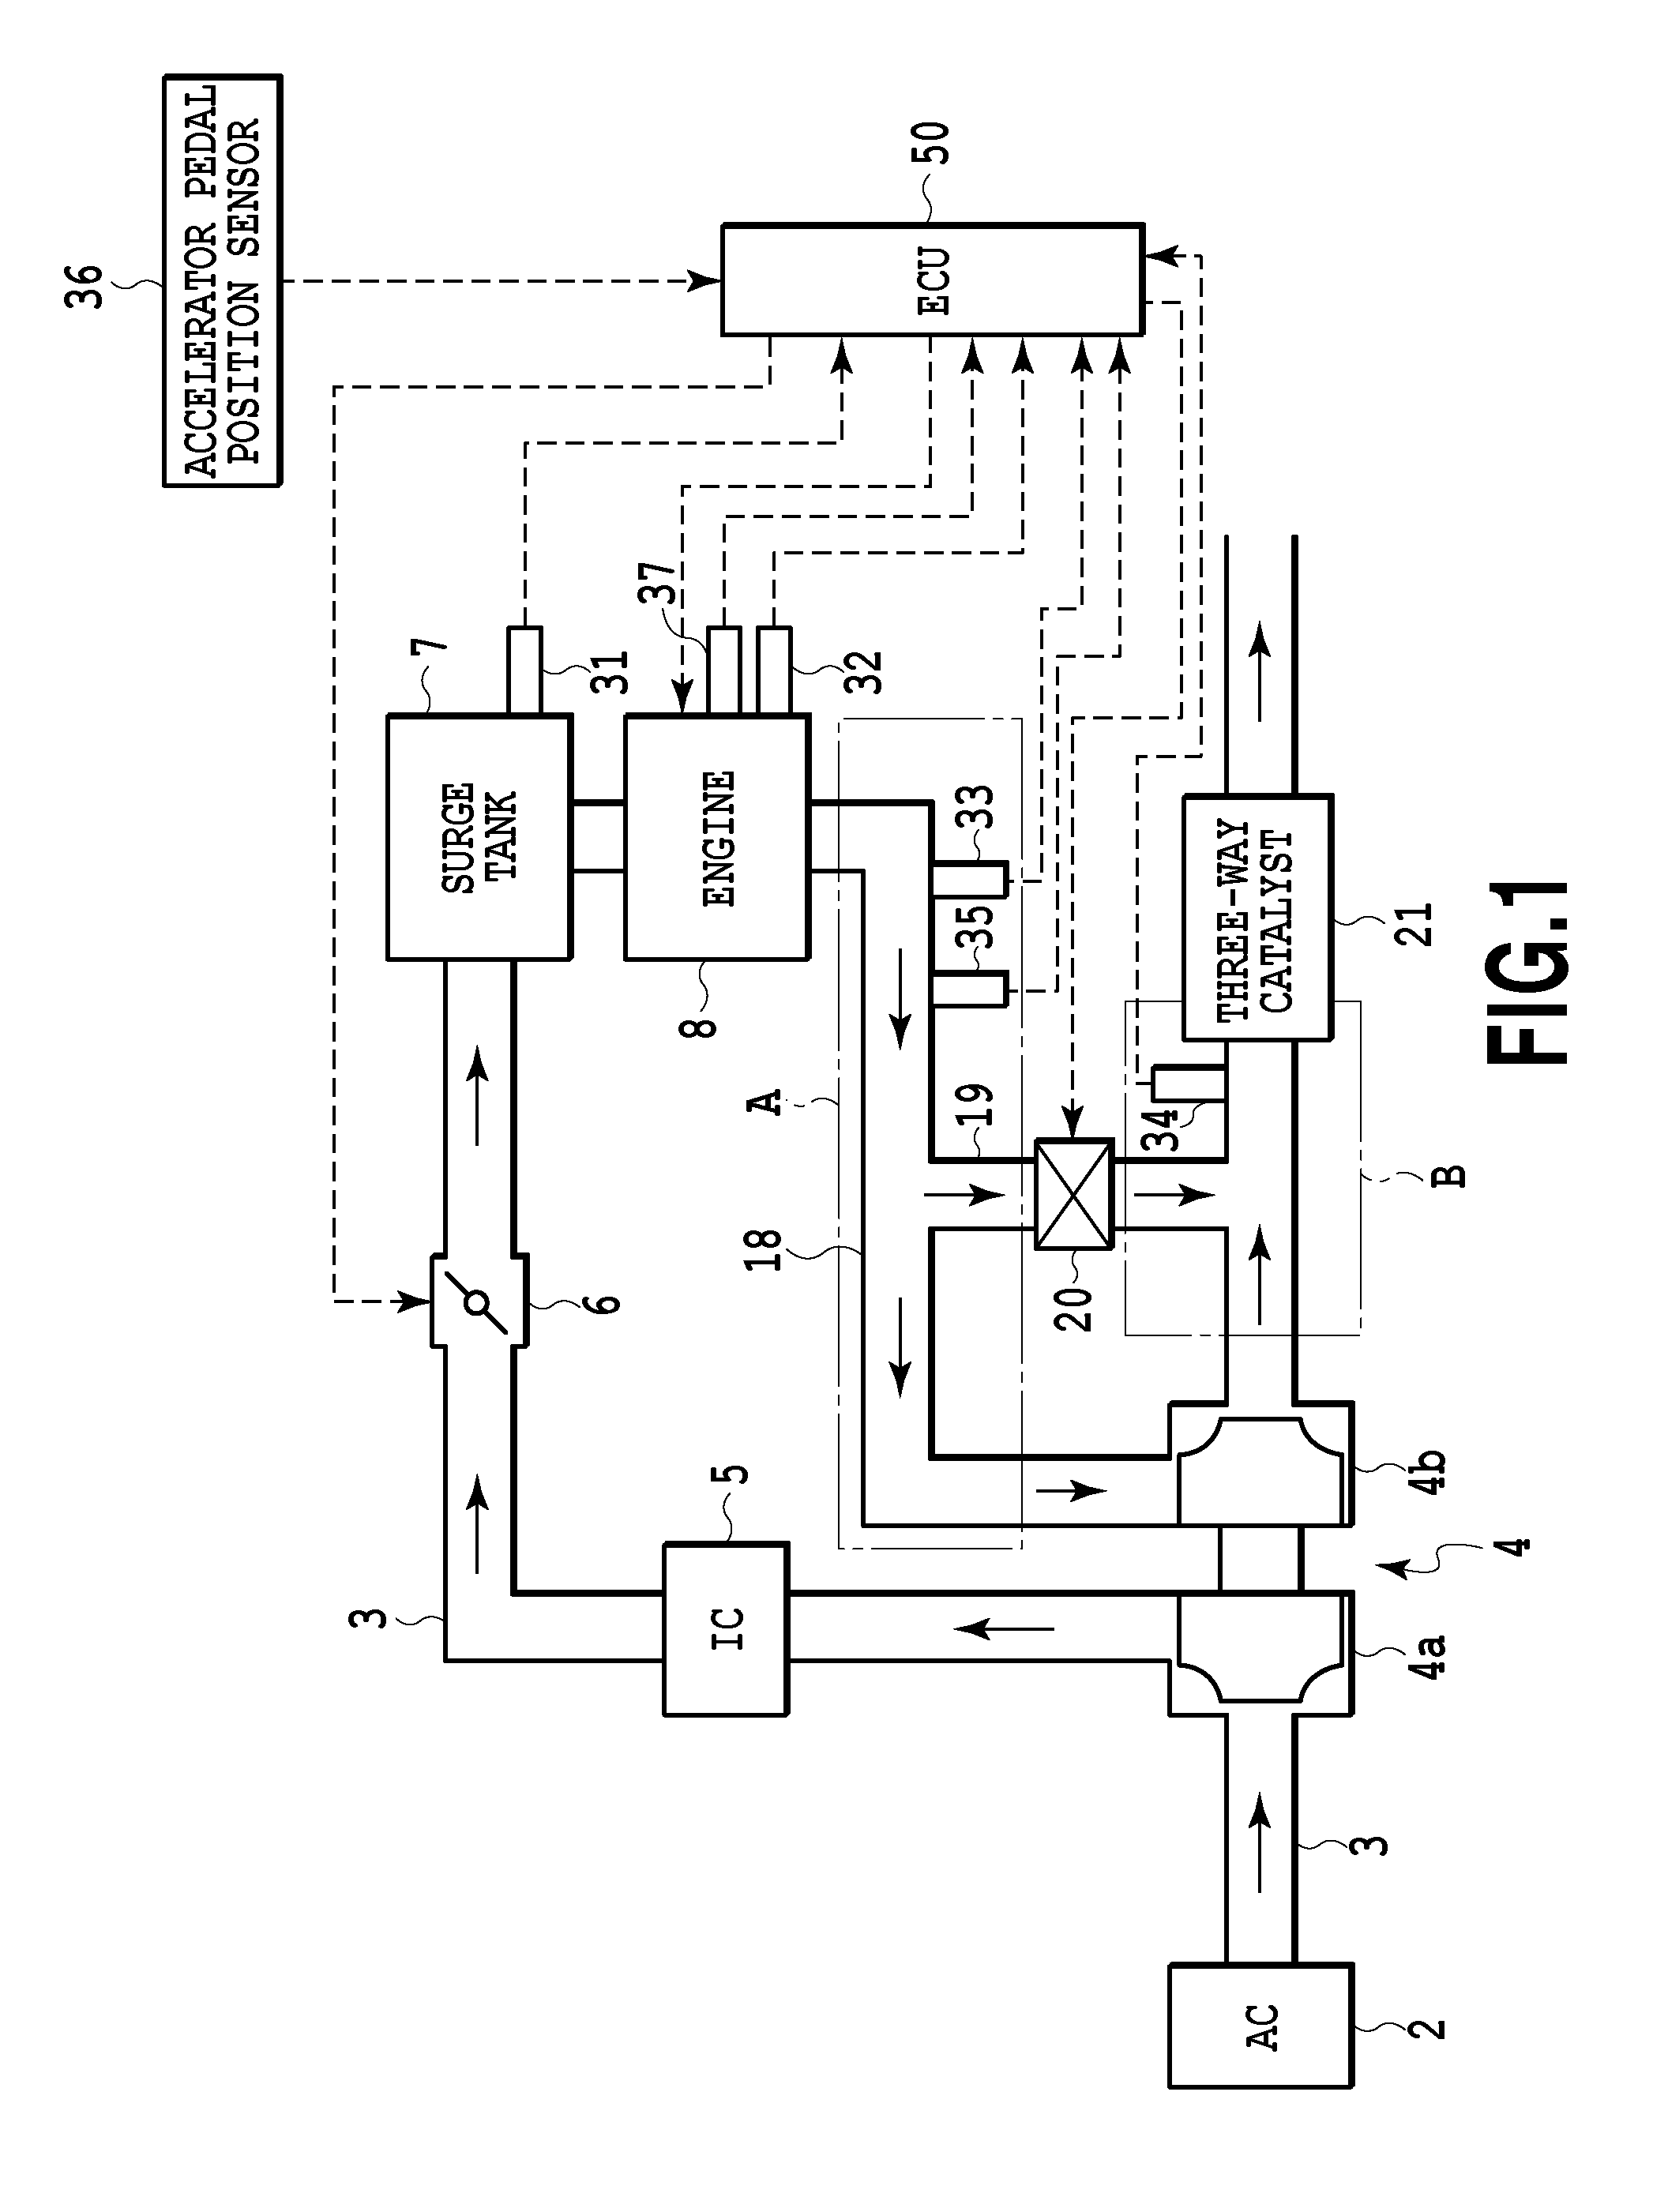 Apparatus for controlling an internal combustion engine